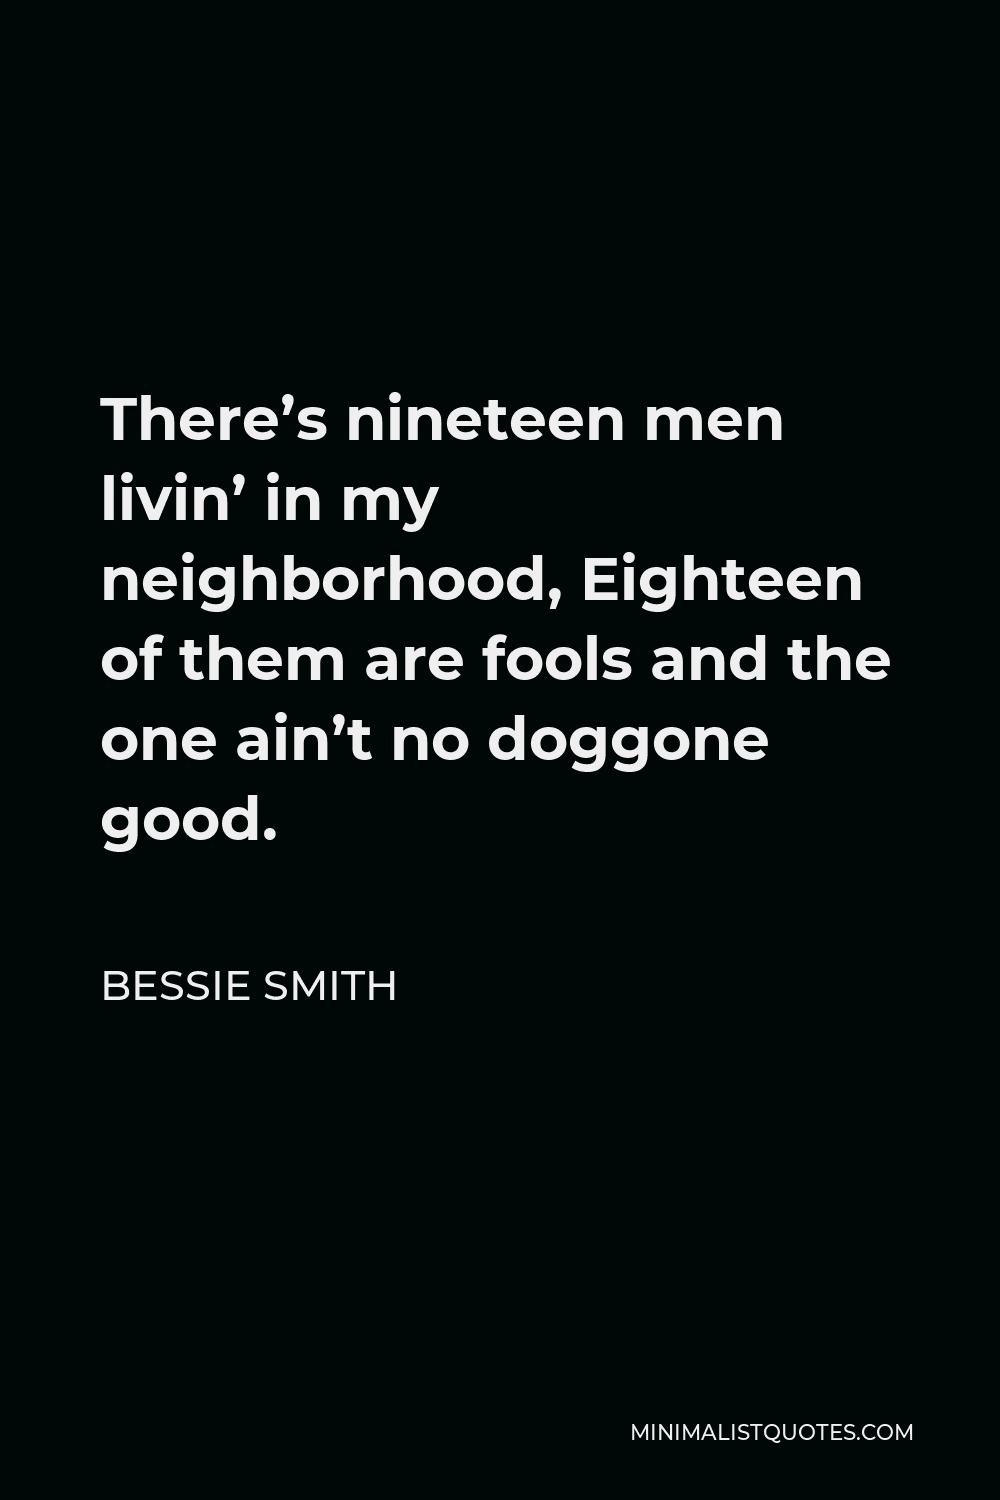 Bessie Smith Quote - There’s nineteen men livin’ in my neighborhood, Eighteen of them are fools and the one ain’t no doggone good.